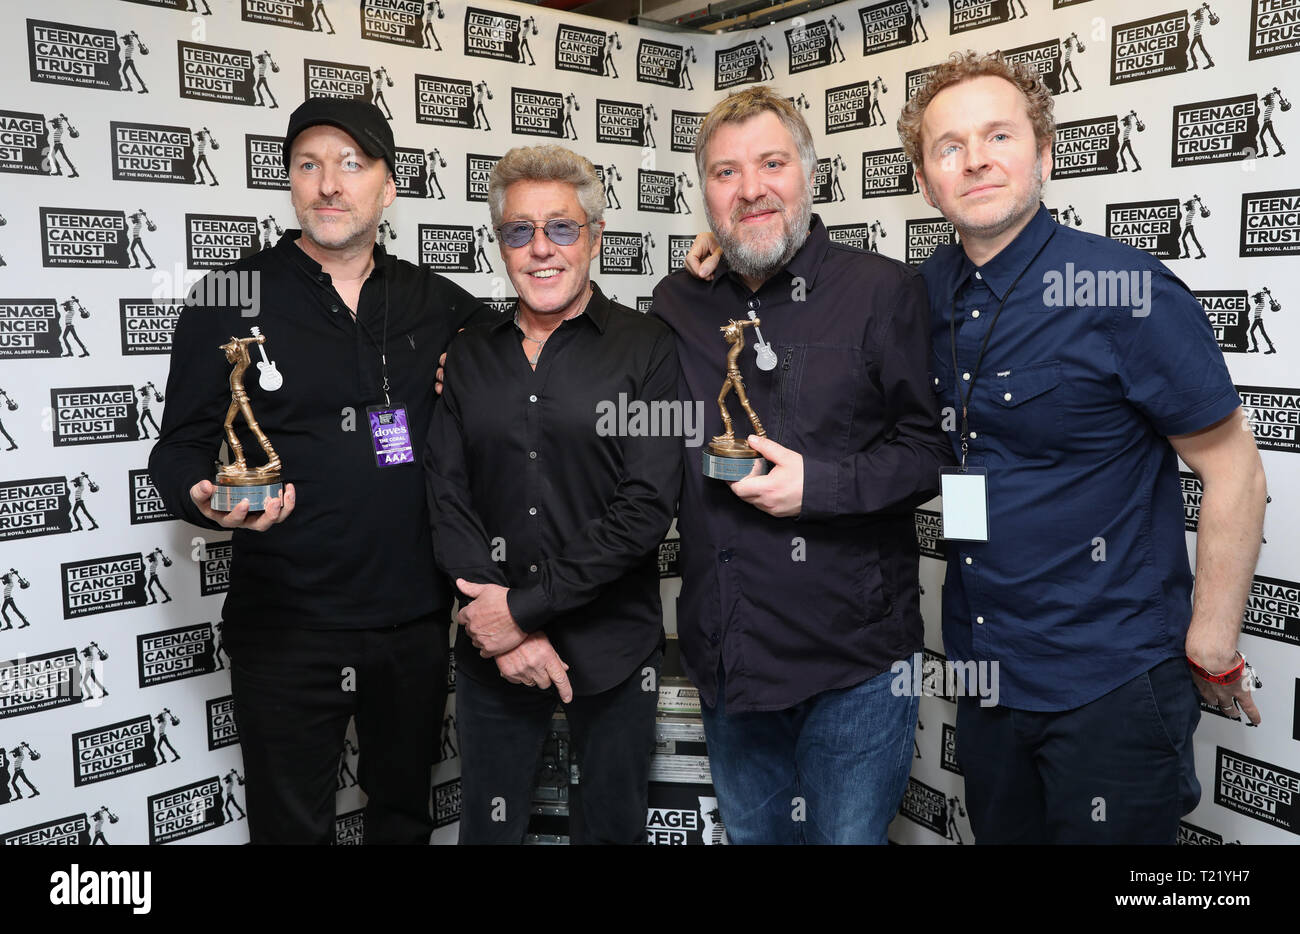 TCT's Honorary Patron Roger Daltrey CBE gives an award to Doves ahead of their performance during the Teenage Cancer Trust Concert, Royal Albert Hall, London. Stock Photo